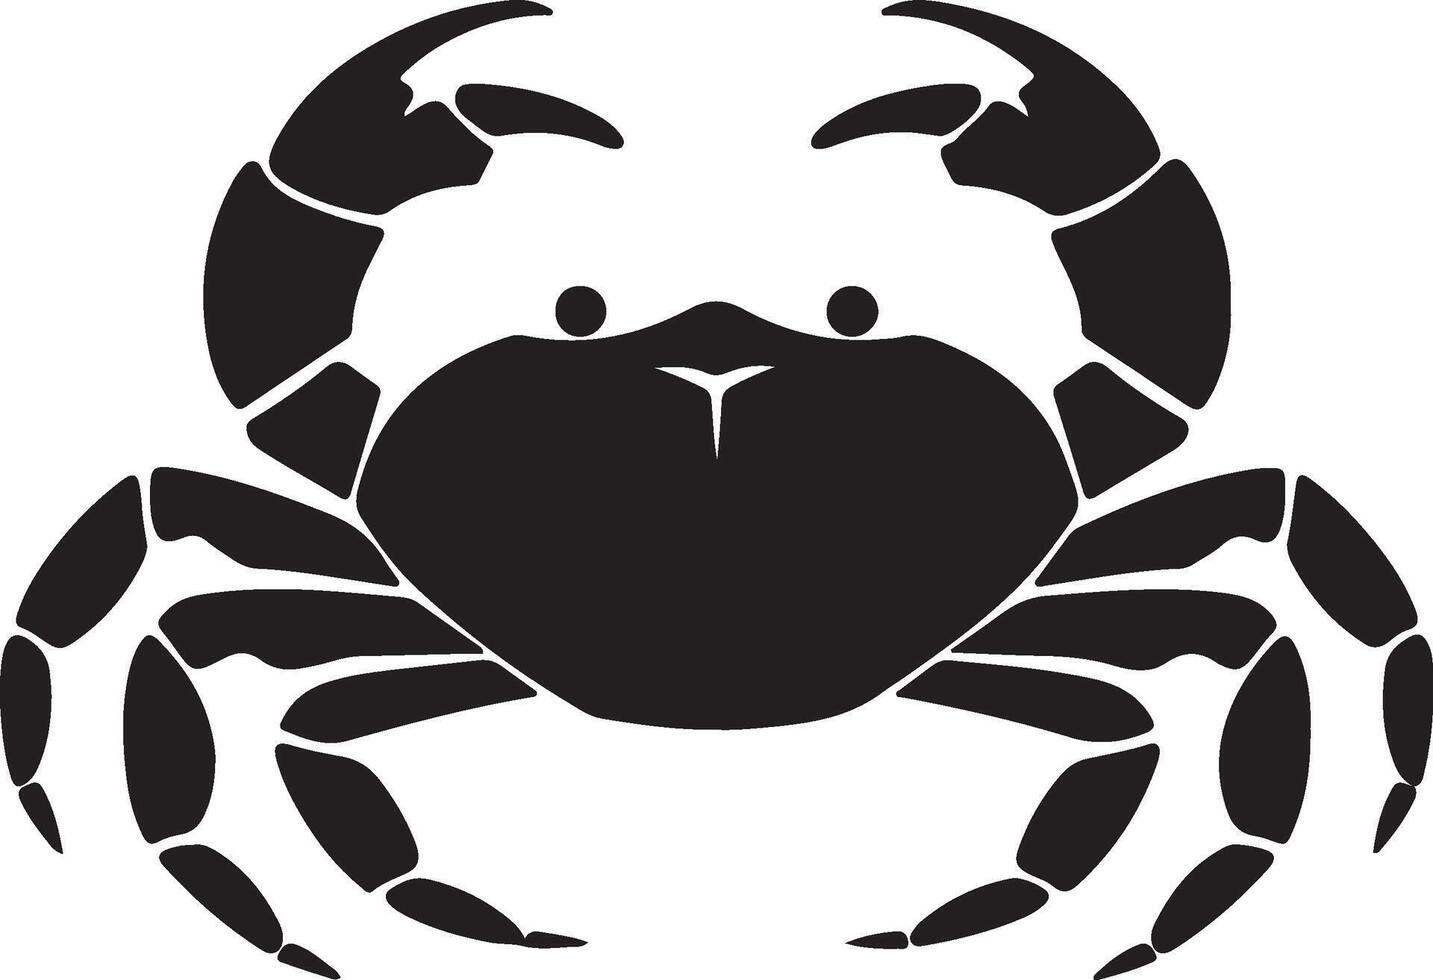 Crab Silhouette Vector Illustration White Background